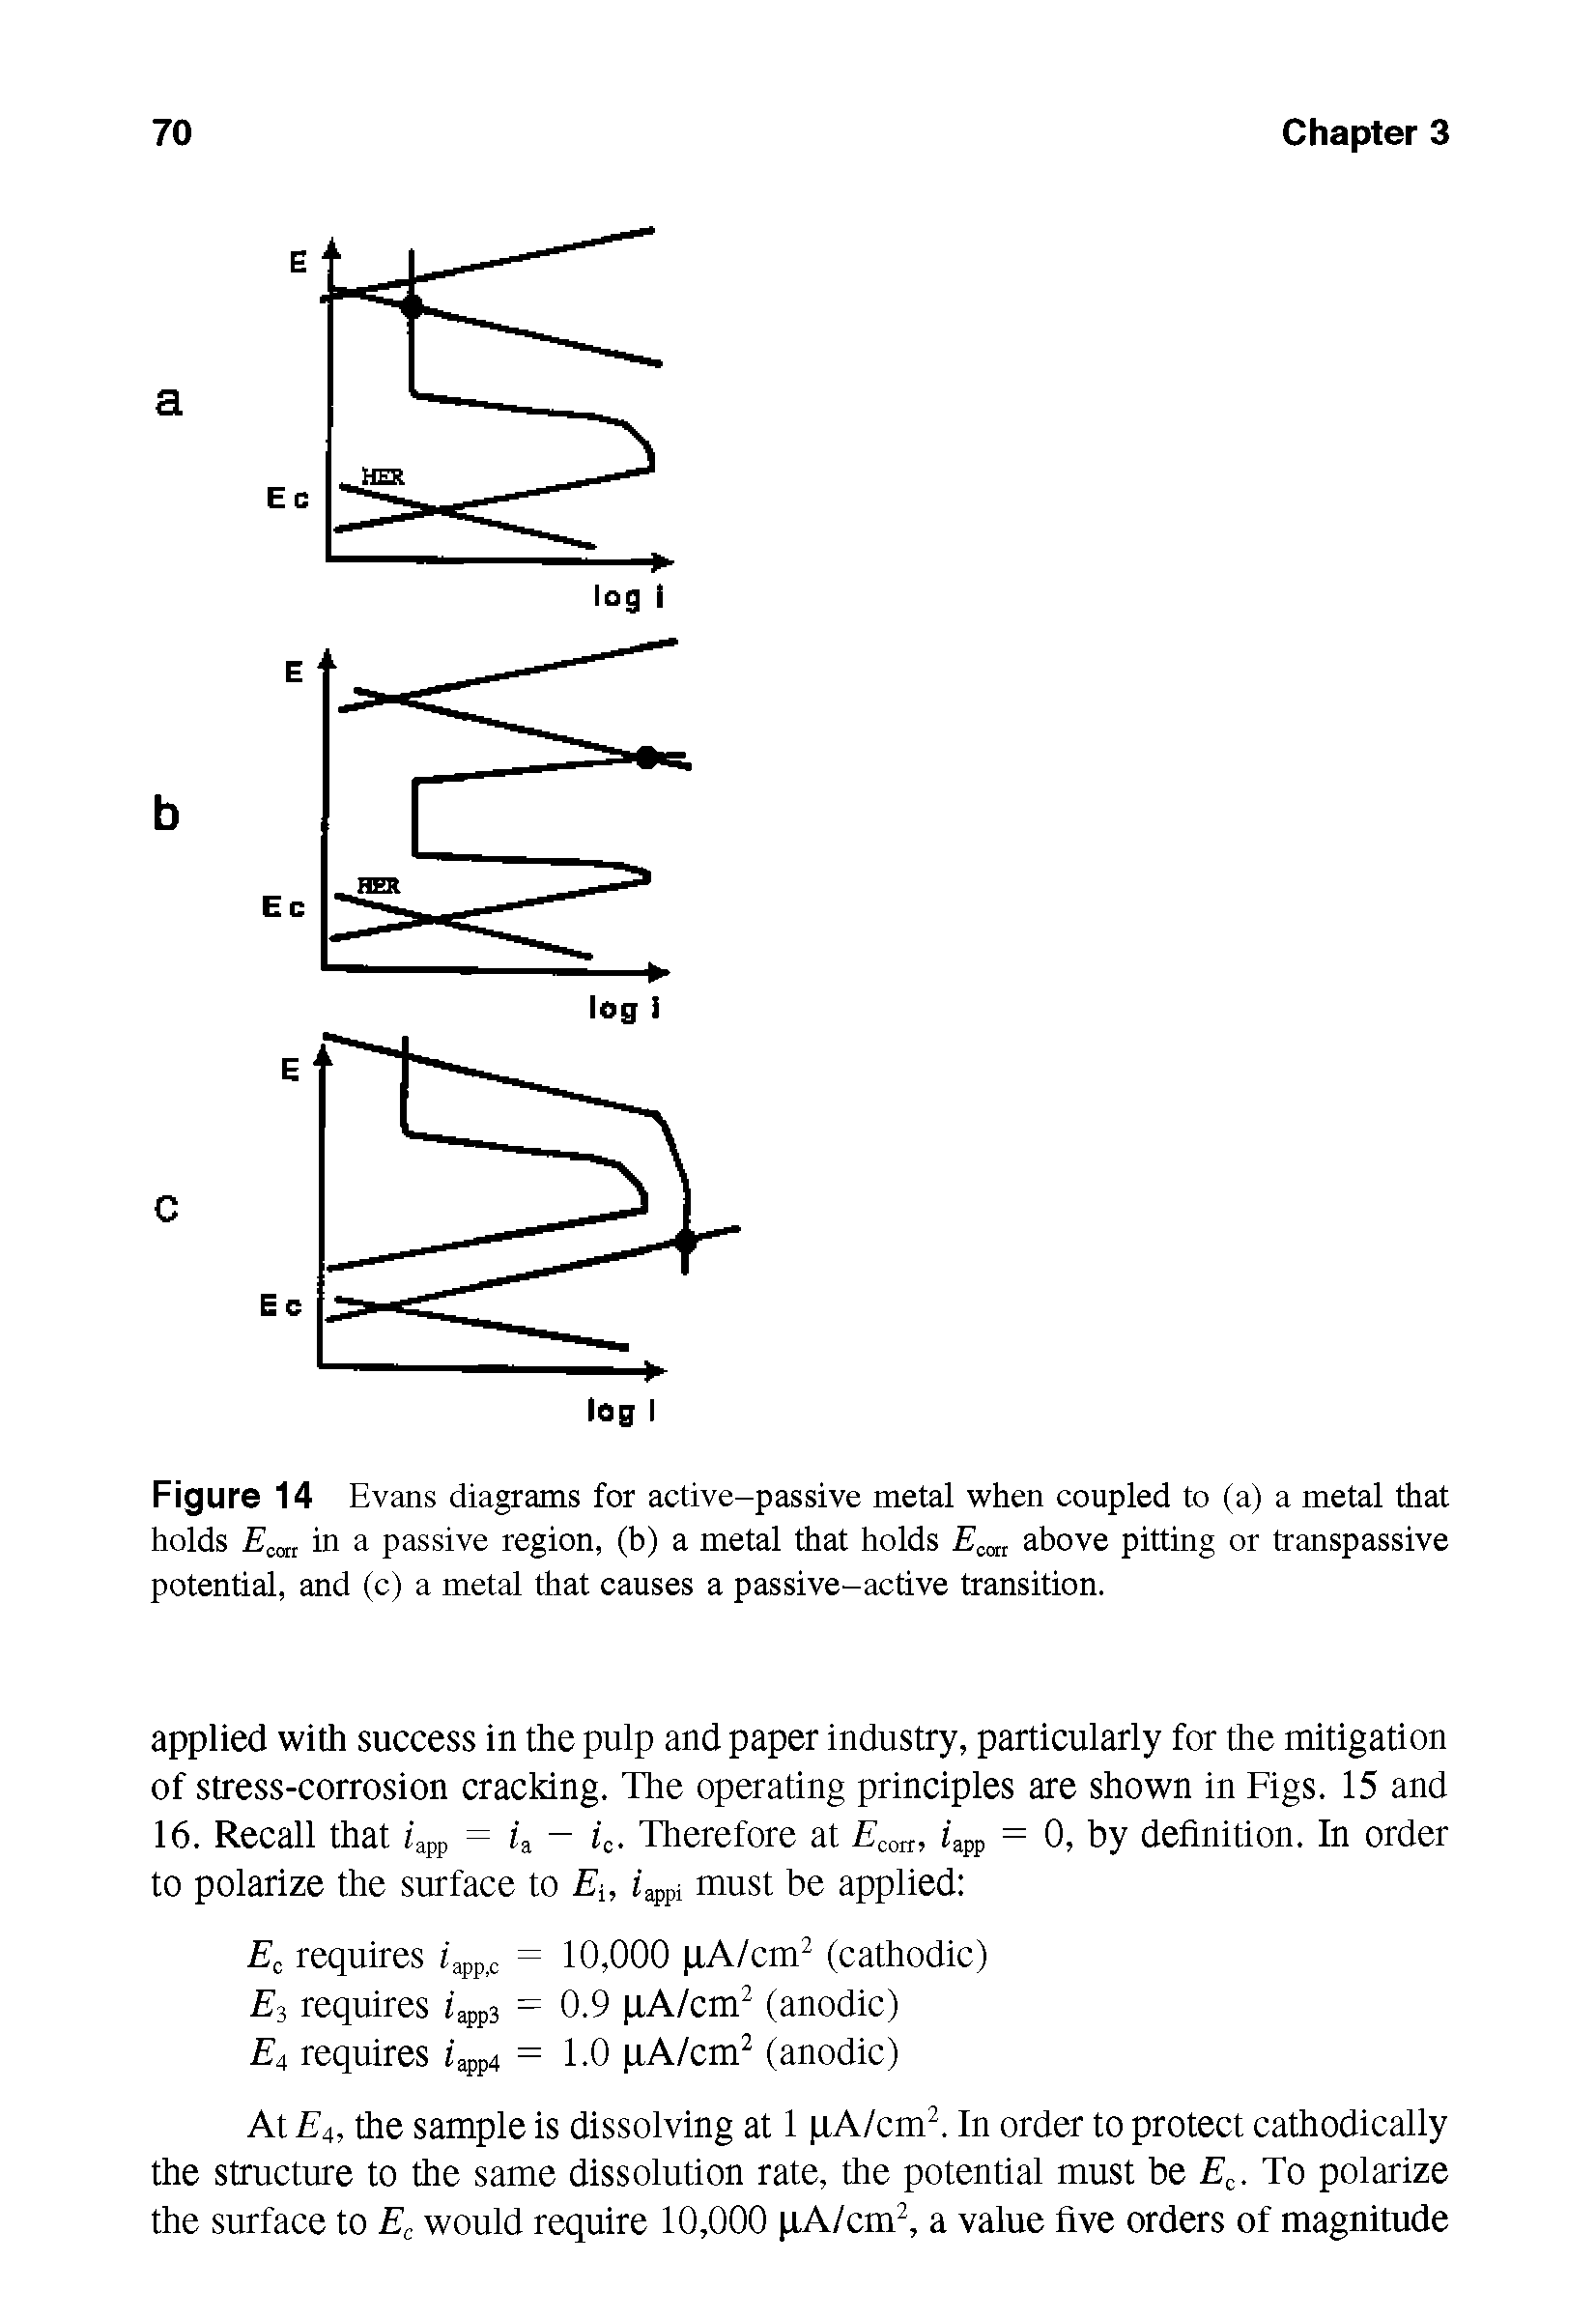 Figure 14 Evans diagrams for active-passive metal when coupled to (a) a metal that holds corr in a passive region, (b) a metal that holds Ecm above pitting or transpassive potential, and (c) a metal that causes a passive-active transition.